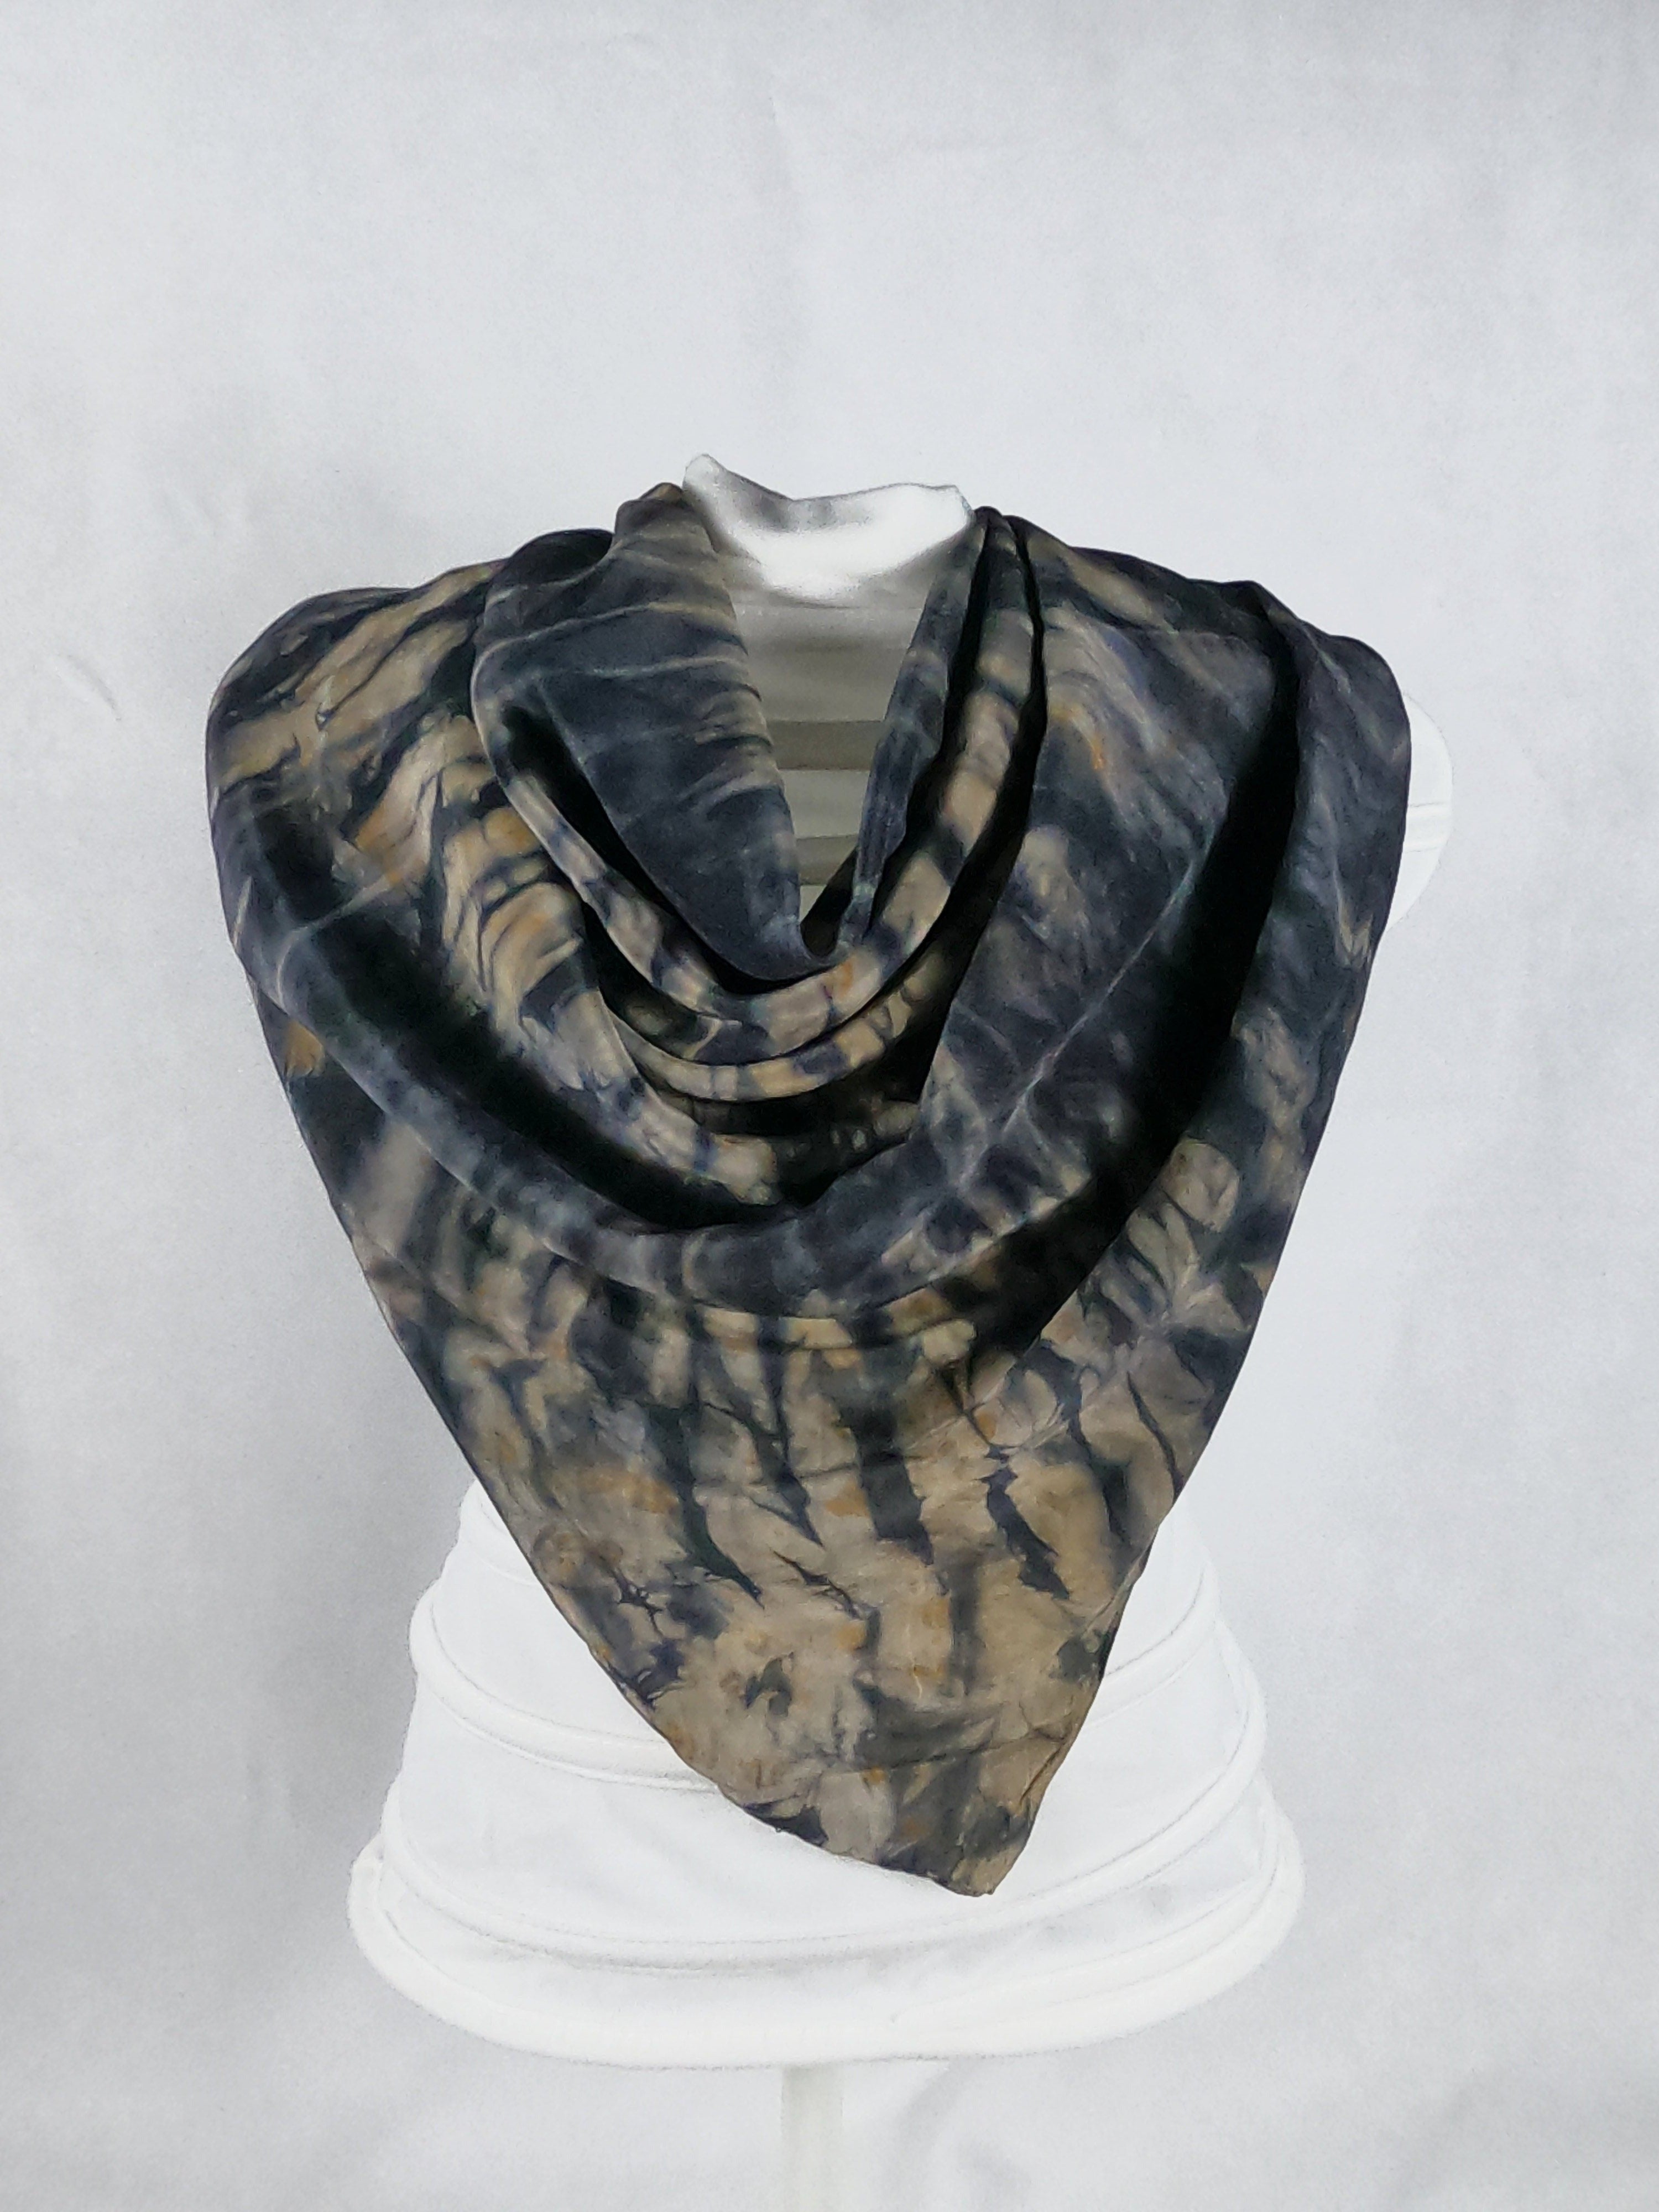 Square silk shawl styled on a mannequin. It has a dark navy and light brown ripple-like print.